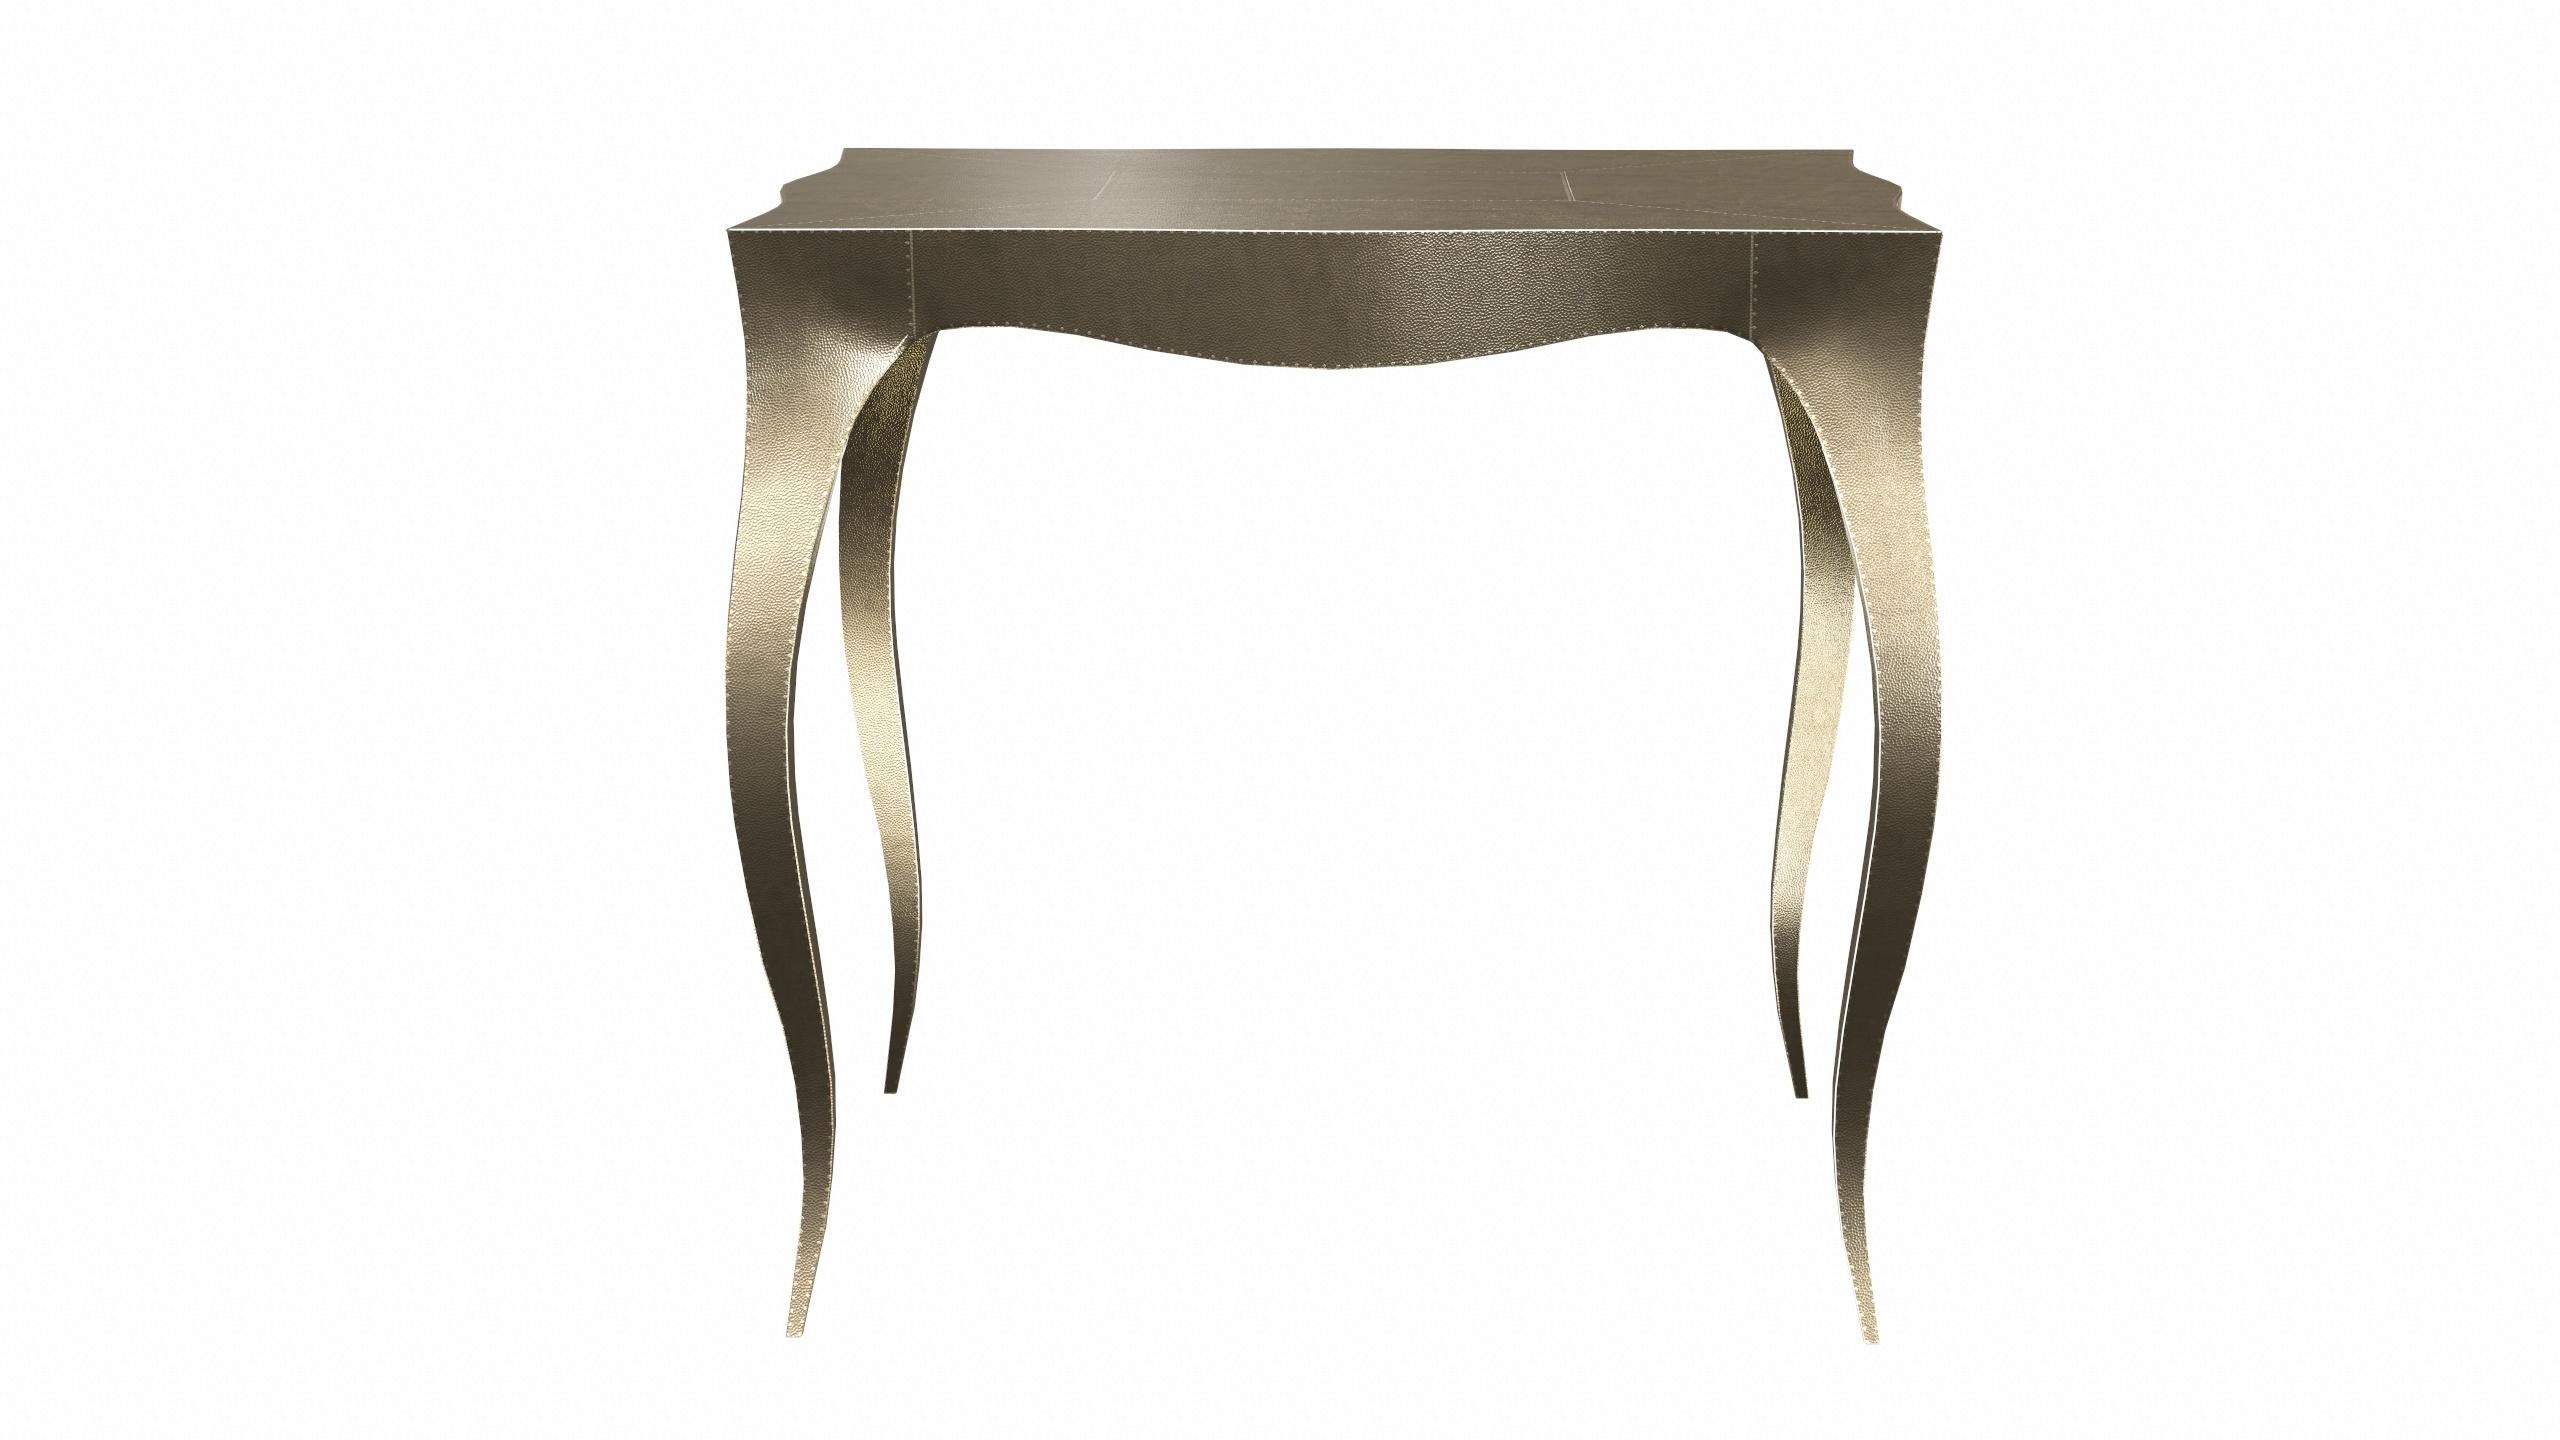 American Louise Art Deco Industrial and Work Tables Mid. Hammered Brass by Paul Mathieu For Sale